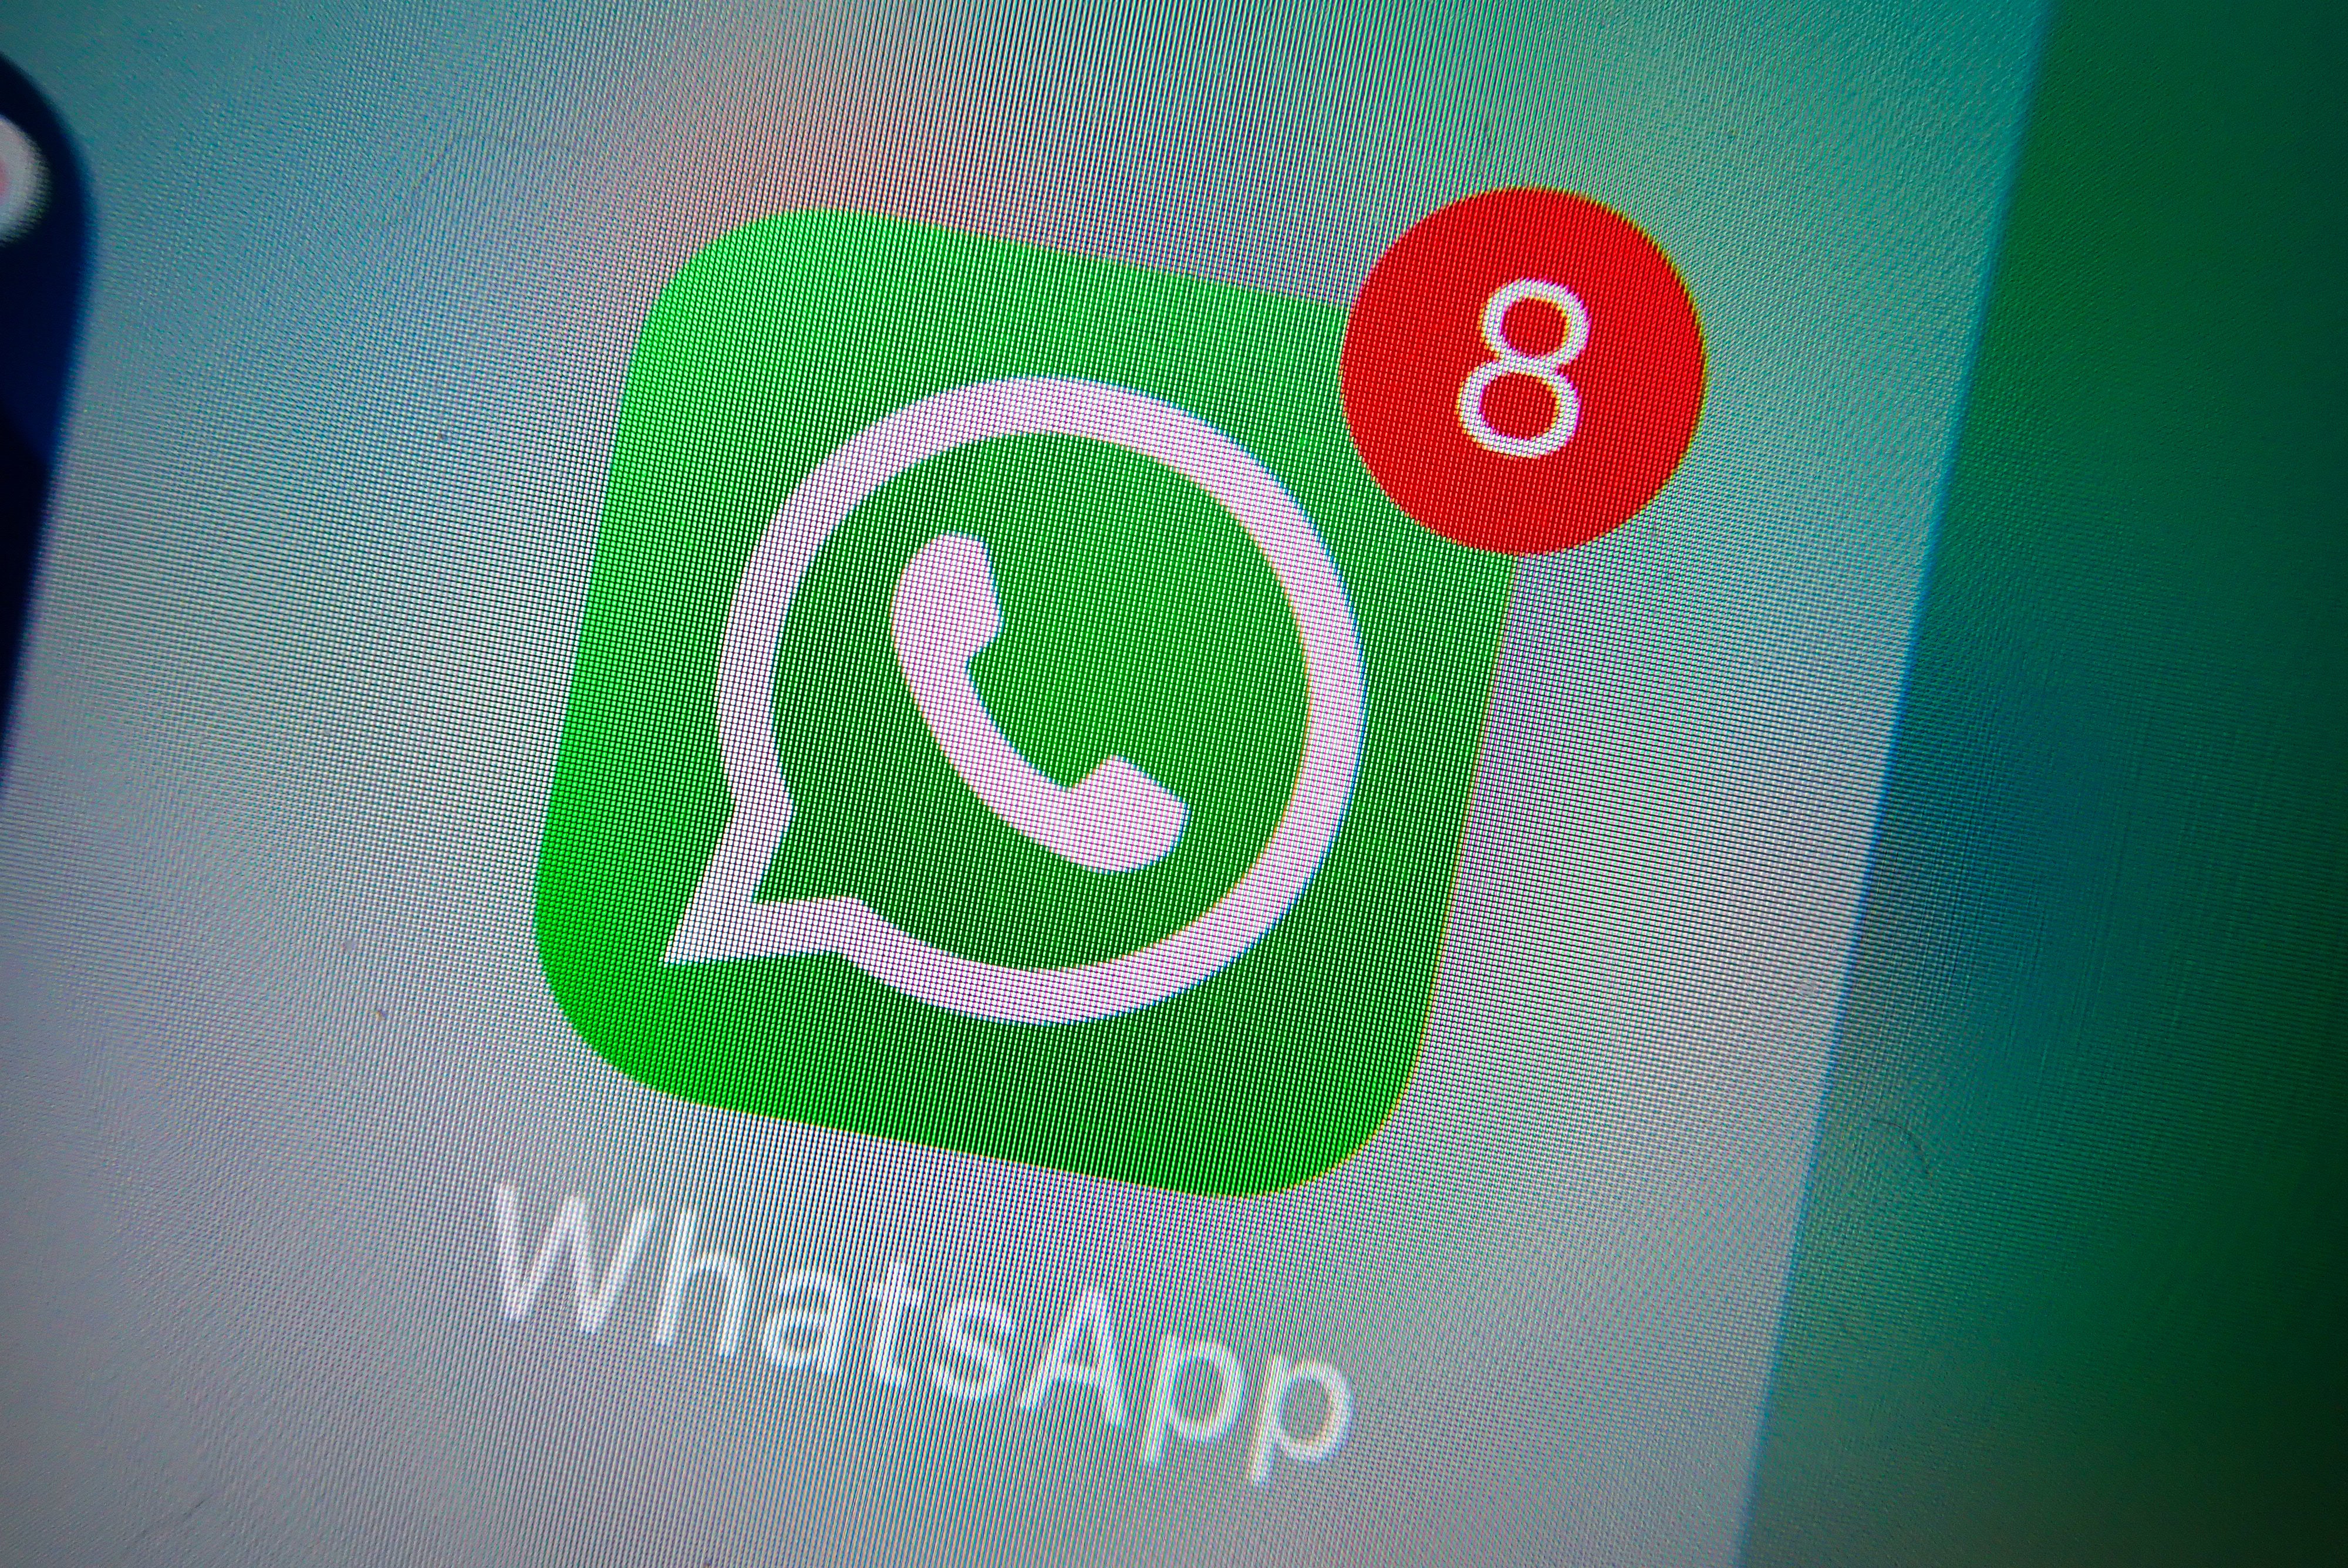 Unsolicited WhatsApp messages are a favourite among scammers for making contact with potential victims. Photo: Shutterstock